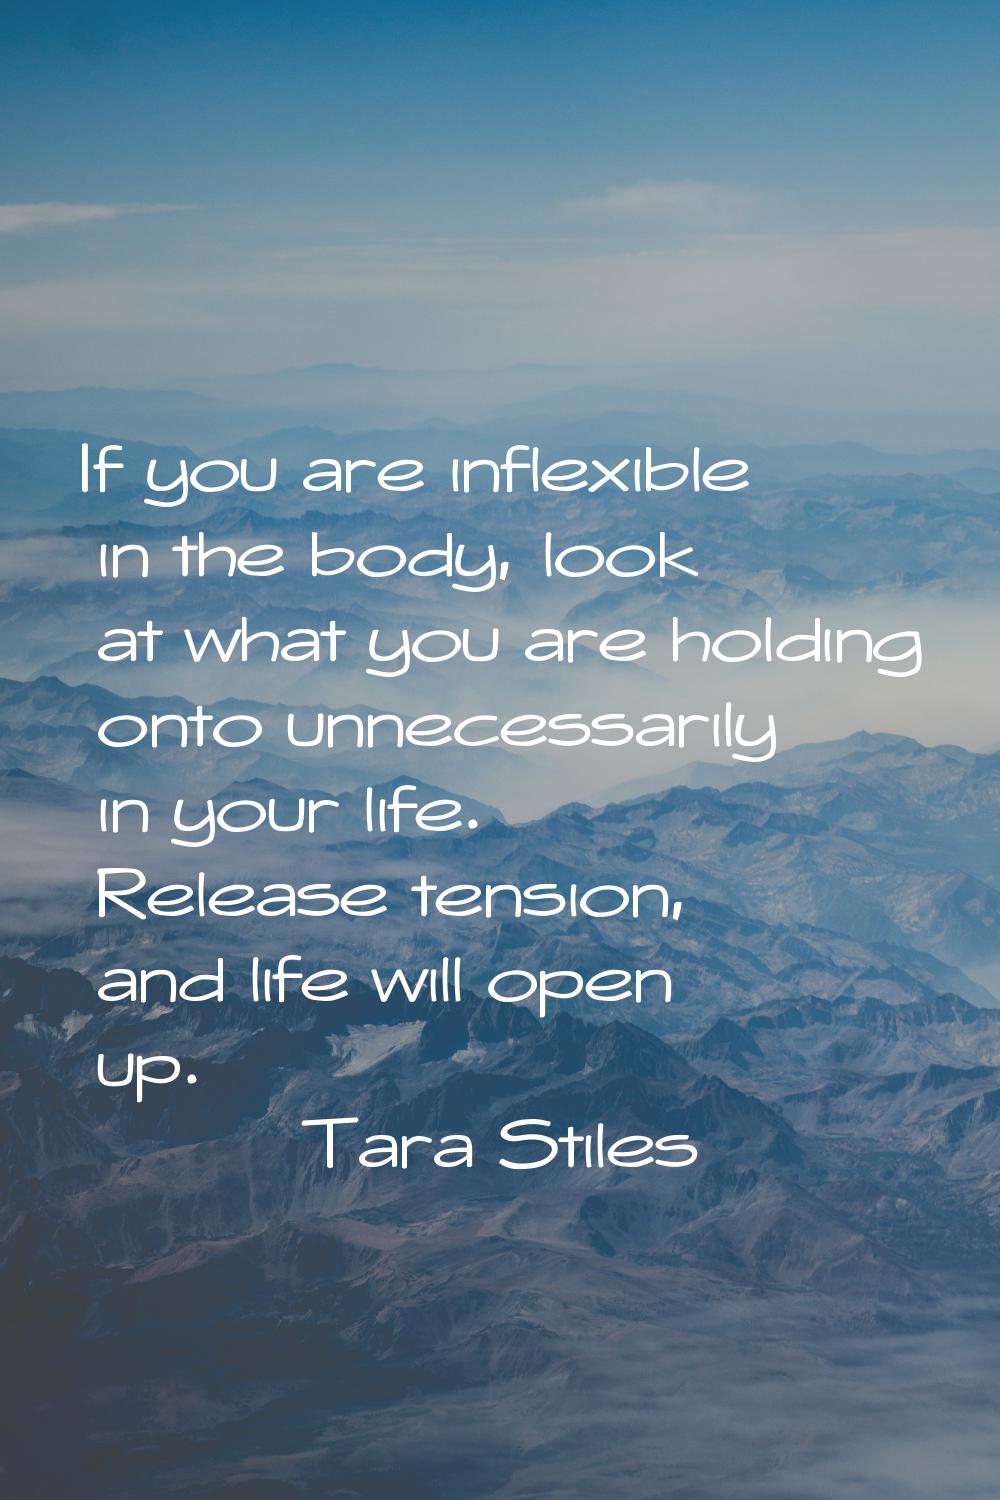 If you are inflexible in the body, look at what you are holding onto unnecessarily in your life. Re